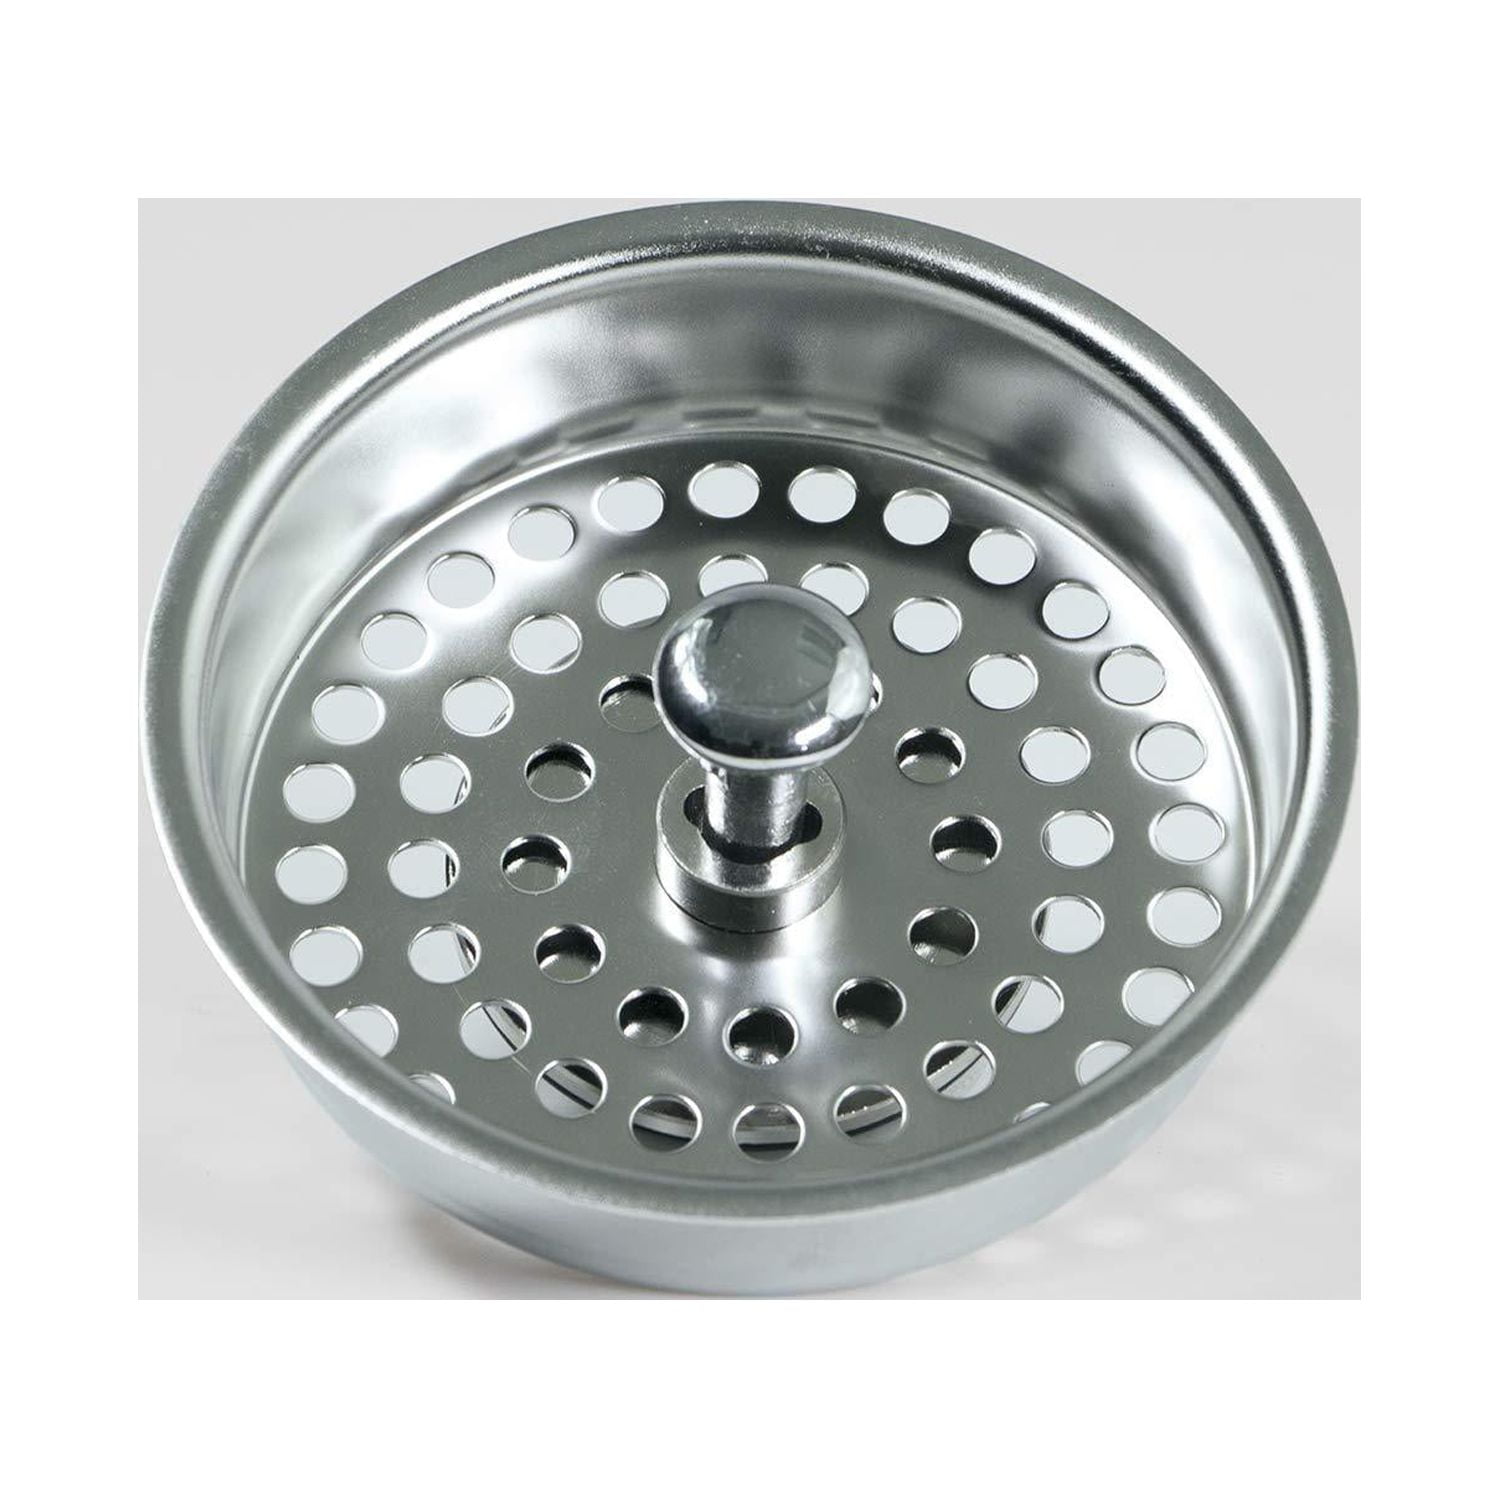 Universal Drain 30051 3 Stainless Steel Strainer Basket, FITS Most Sinks,  Silver